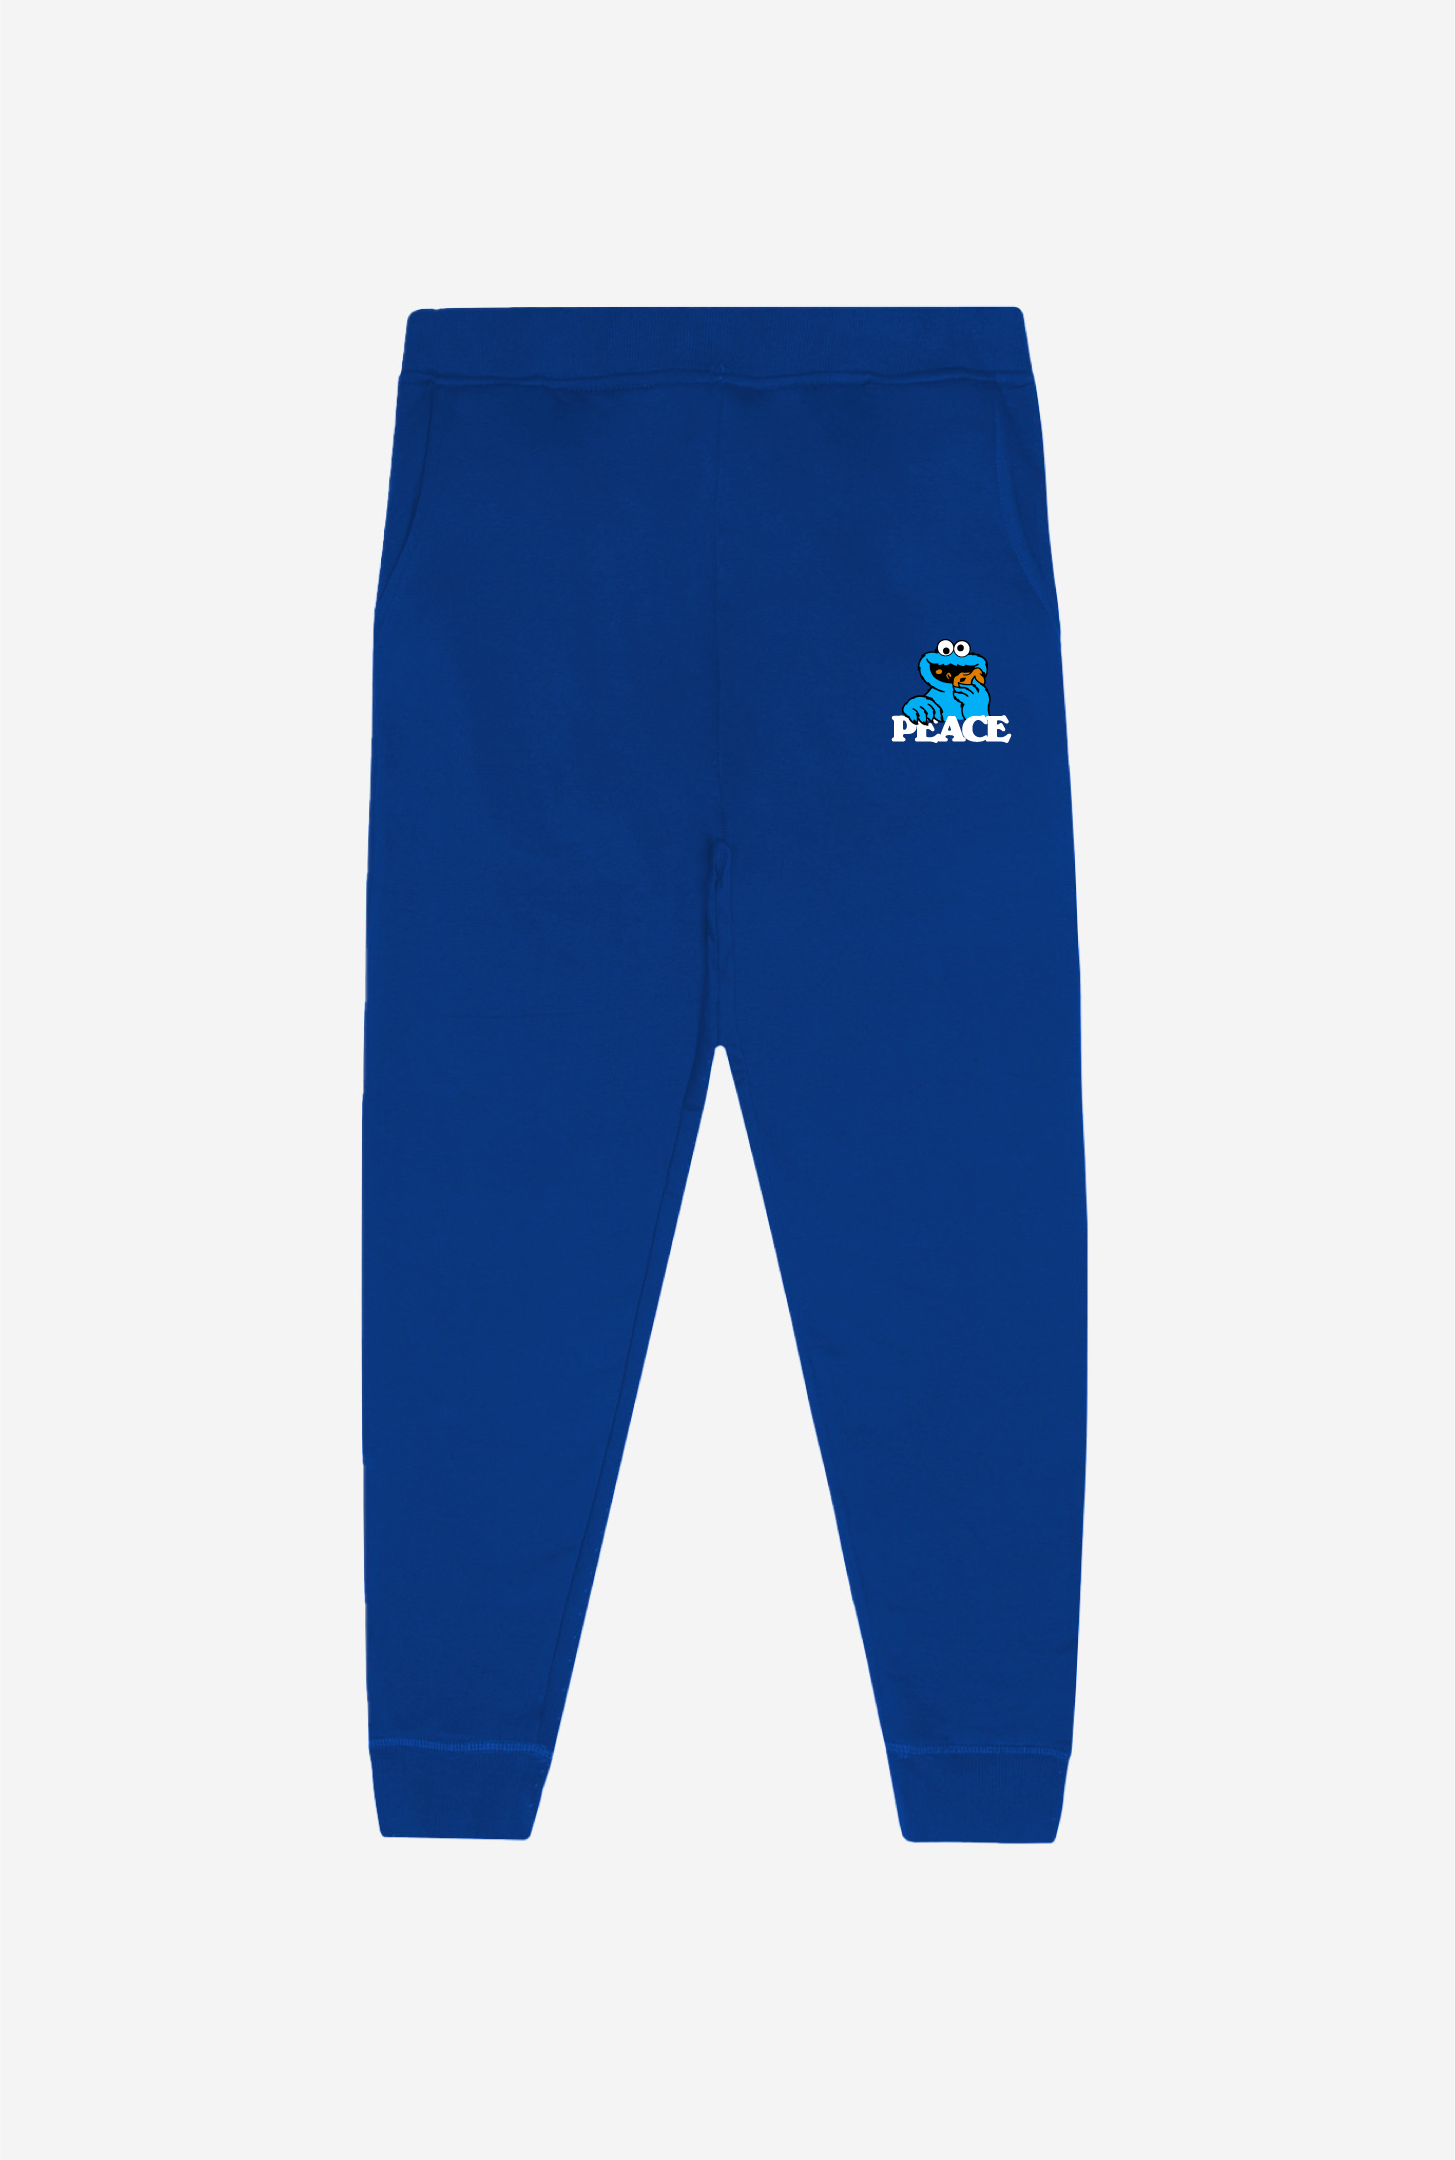 Cookie Monster Peace Jogger - Royal Blue